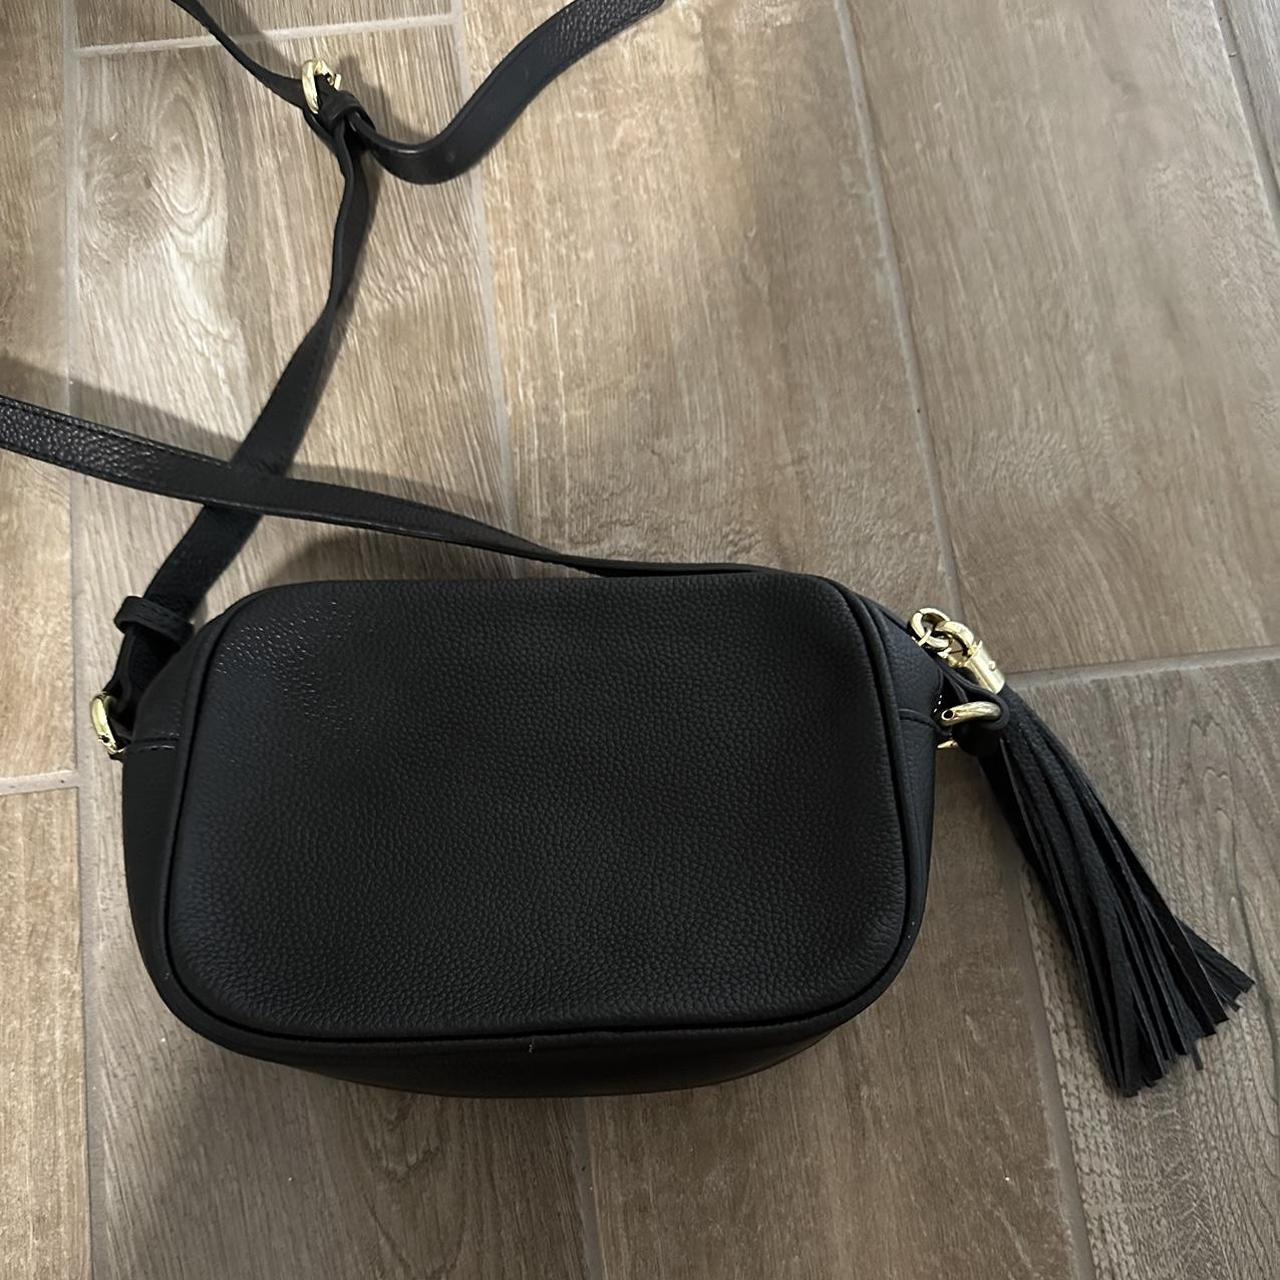 Black leather purse -never used -no flaws - Depop